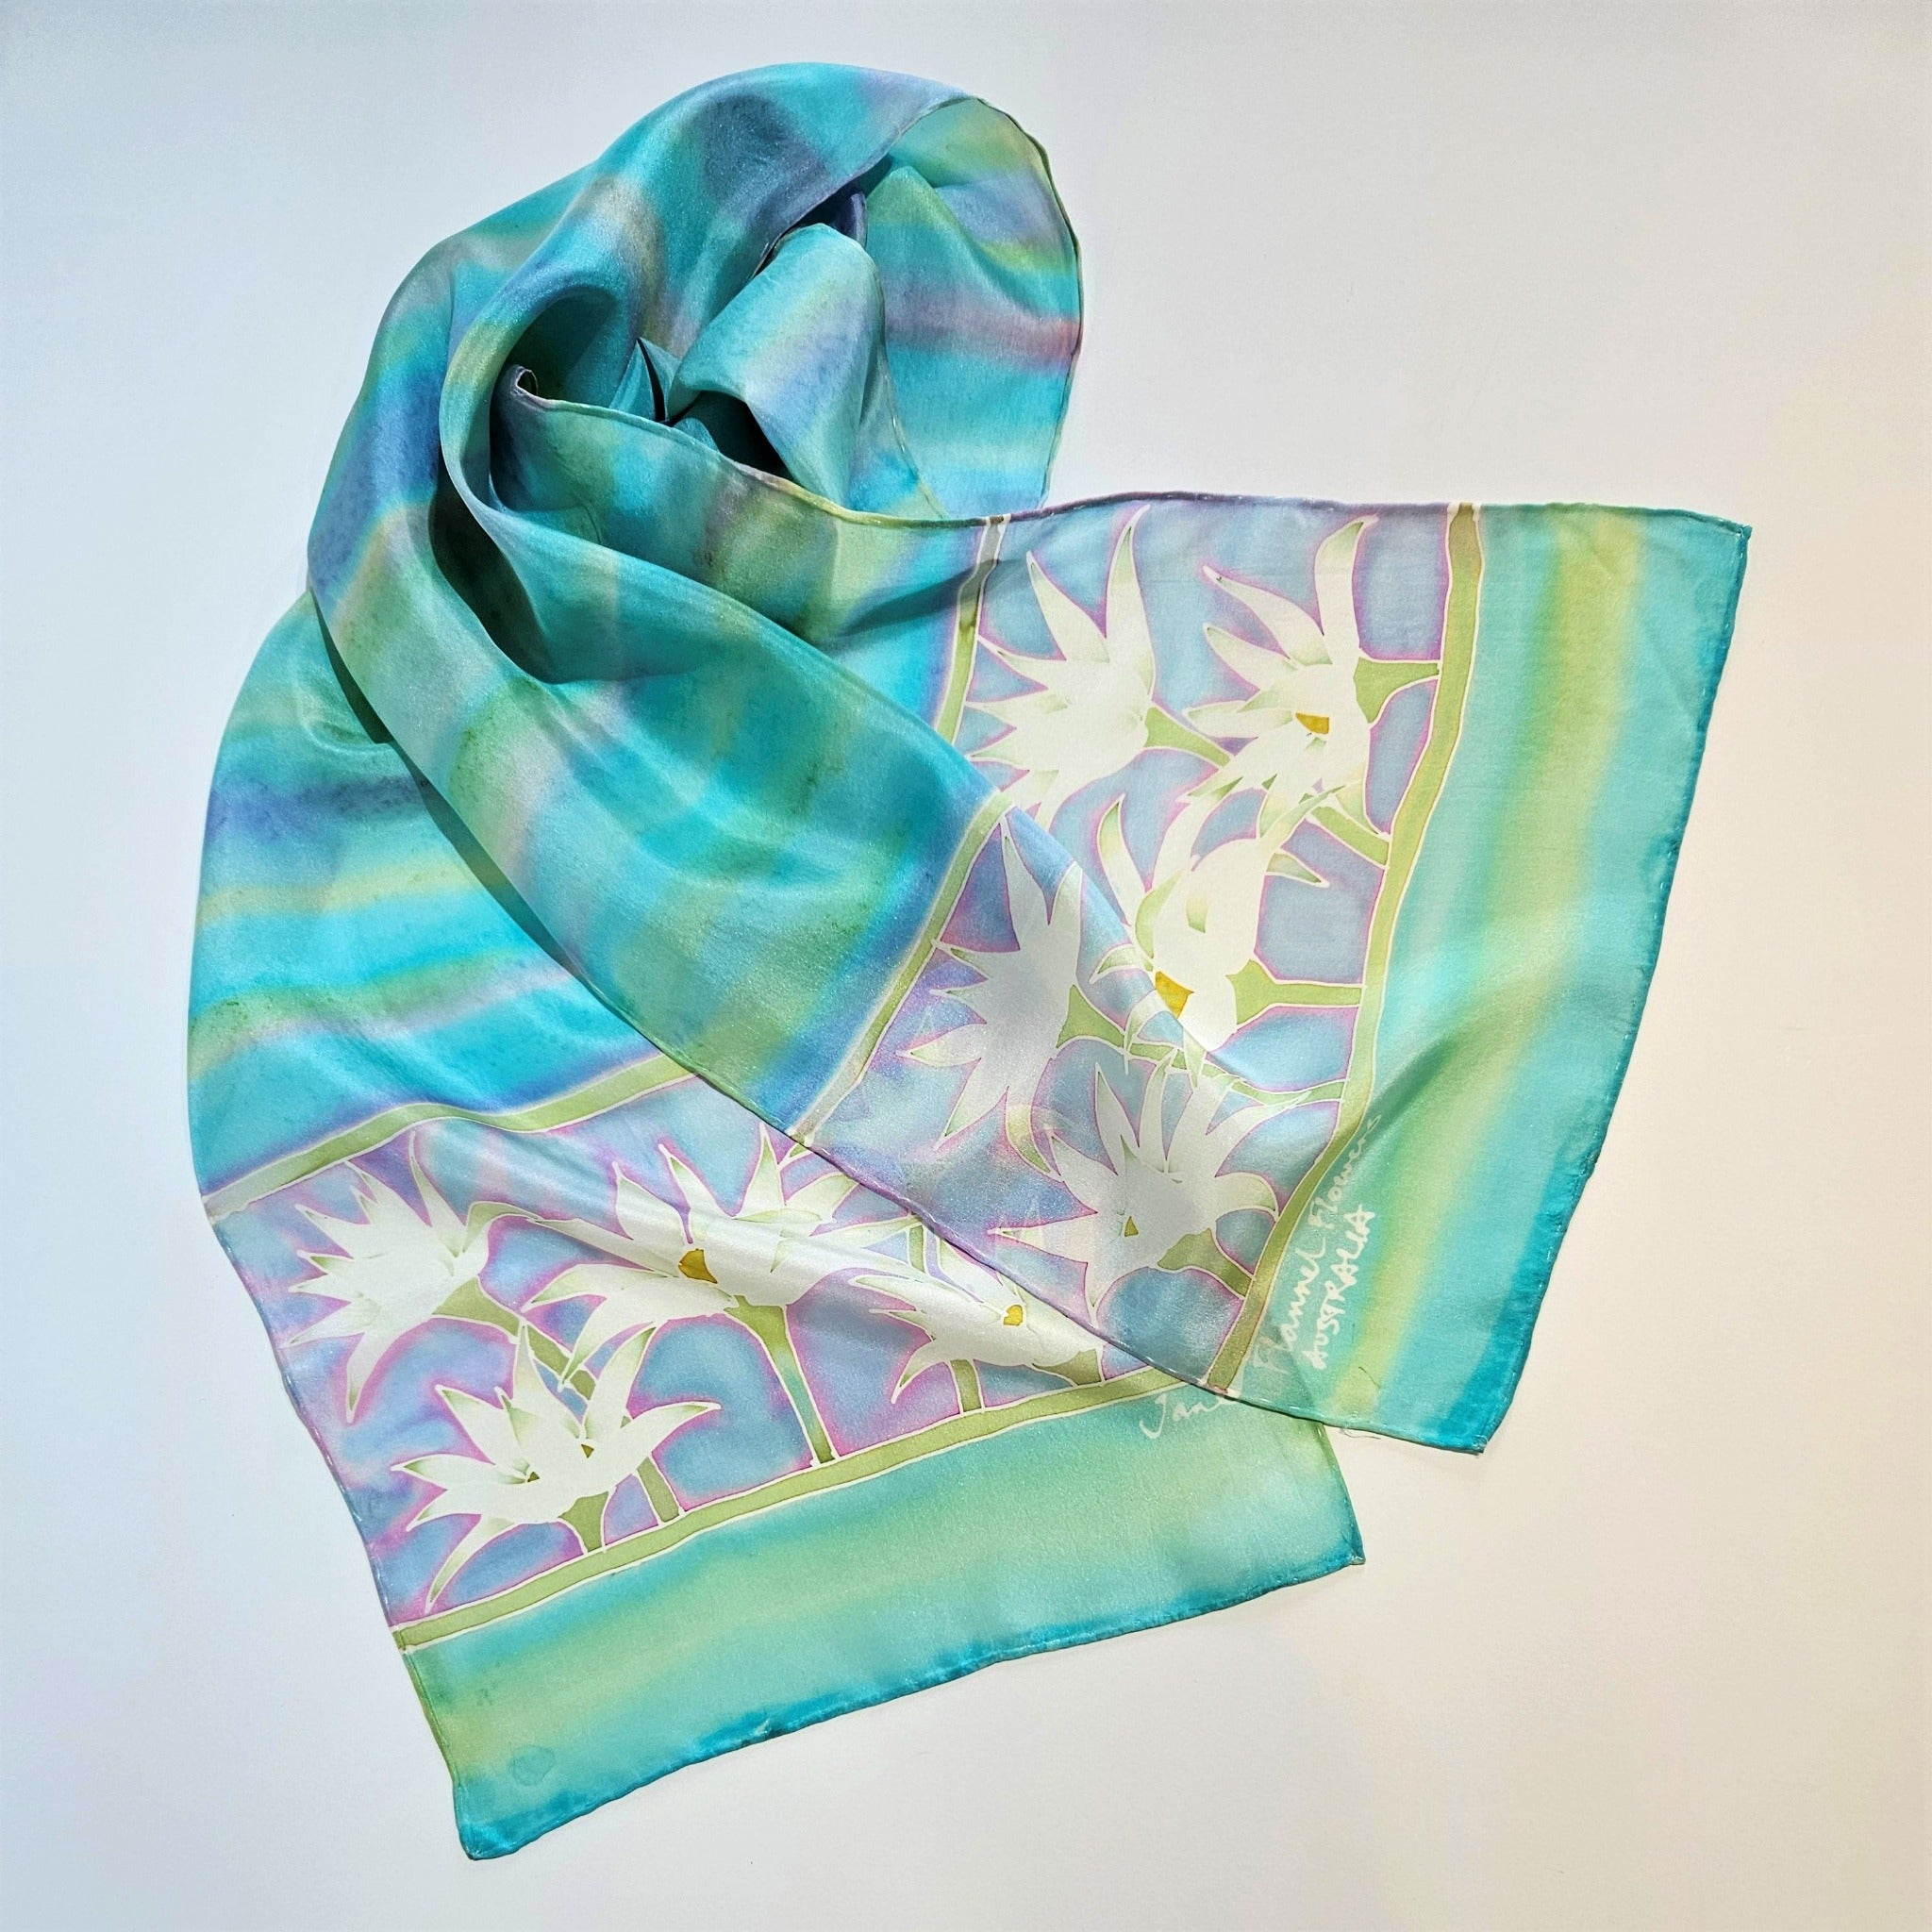 Flannel flowers hand painted long silk scarf by Jane Hinde